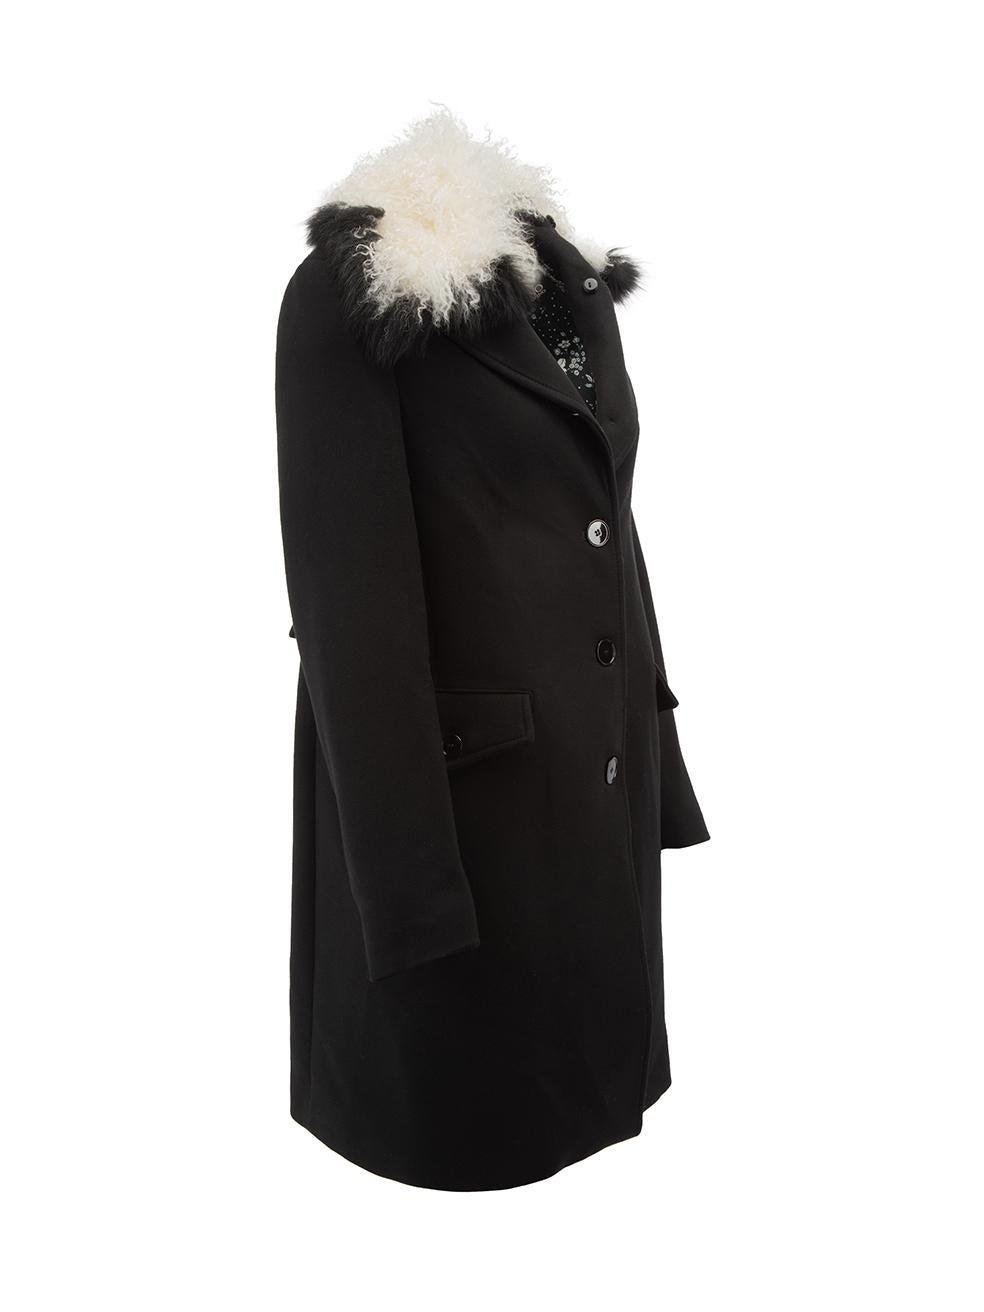 CONDITION is Very good. Minimal wear to coat is evident. Minimal wear to the centre-back with linear pull to the fabric on this used Ermanno Scervino designer resale item. 



Details


Black

Viscose

Long coat

Single breasted

Faux fur trimmed